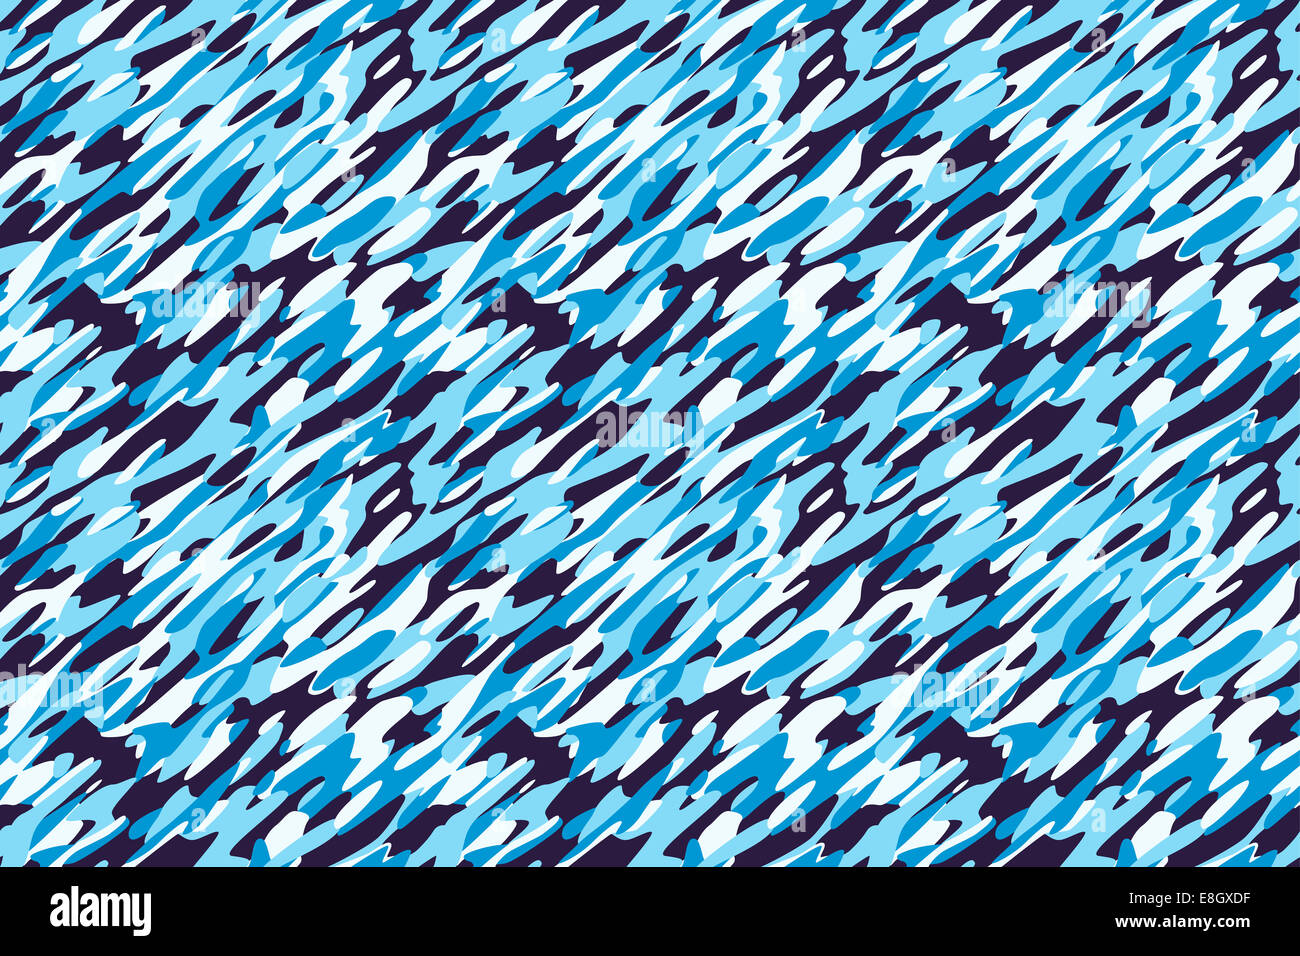 Camouflage Winter Snow White Blue Background - Military camouflage textile pattern. All sides fit perfectly seamless together. Stock Photo